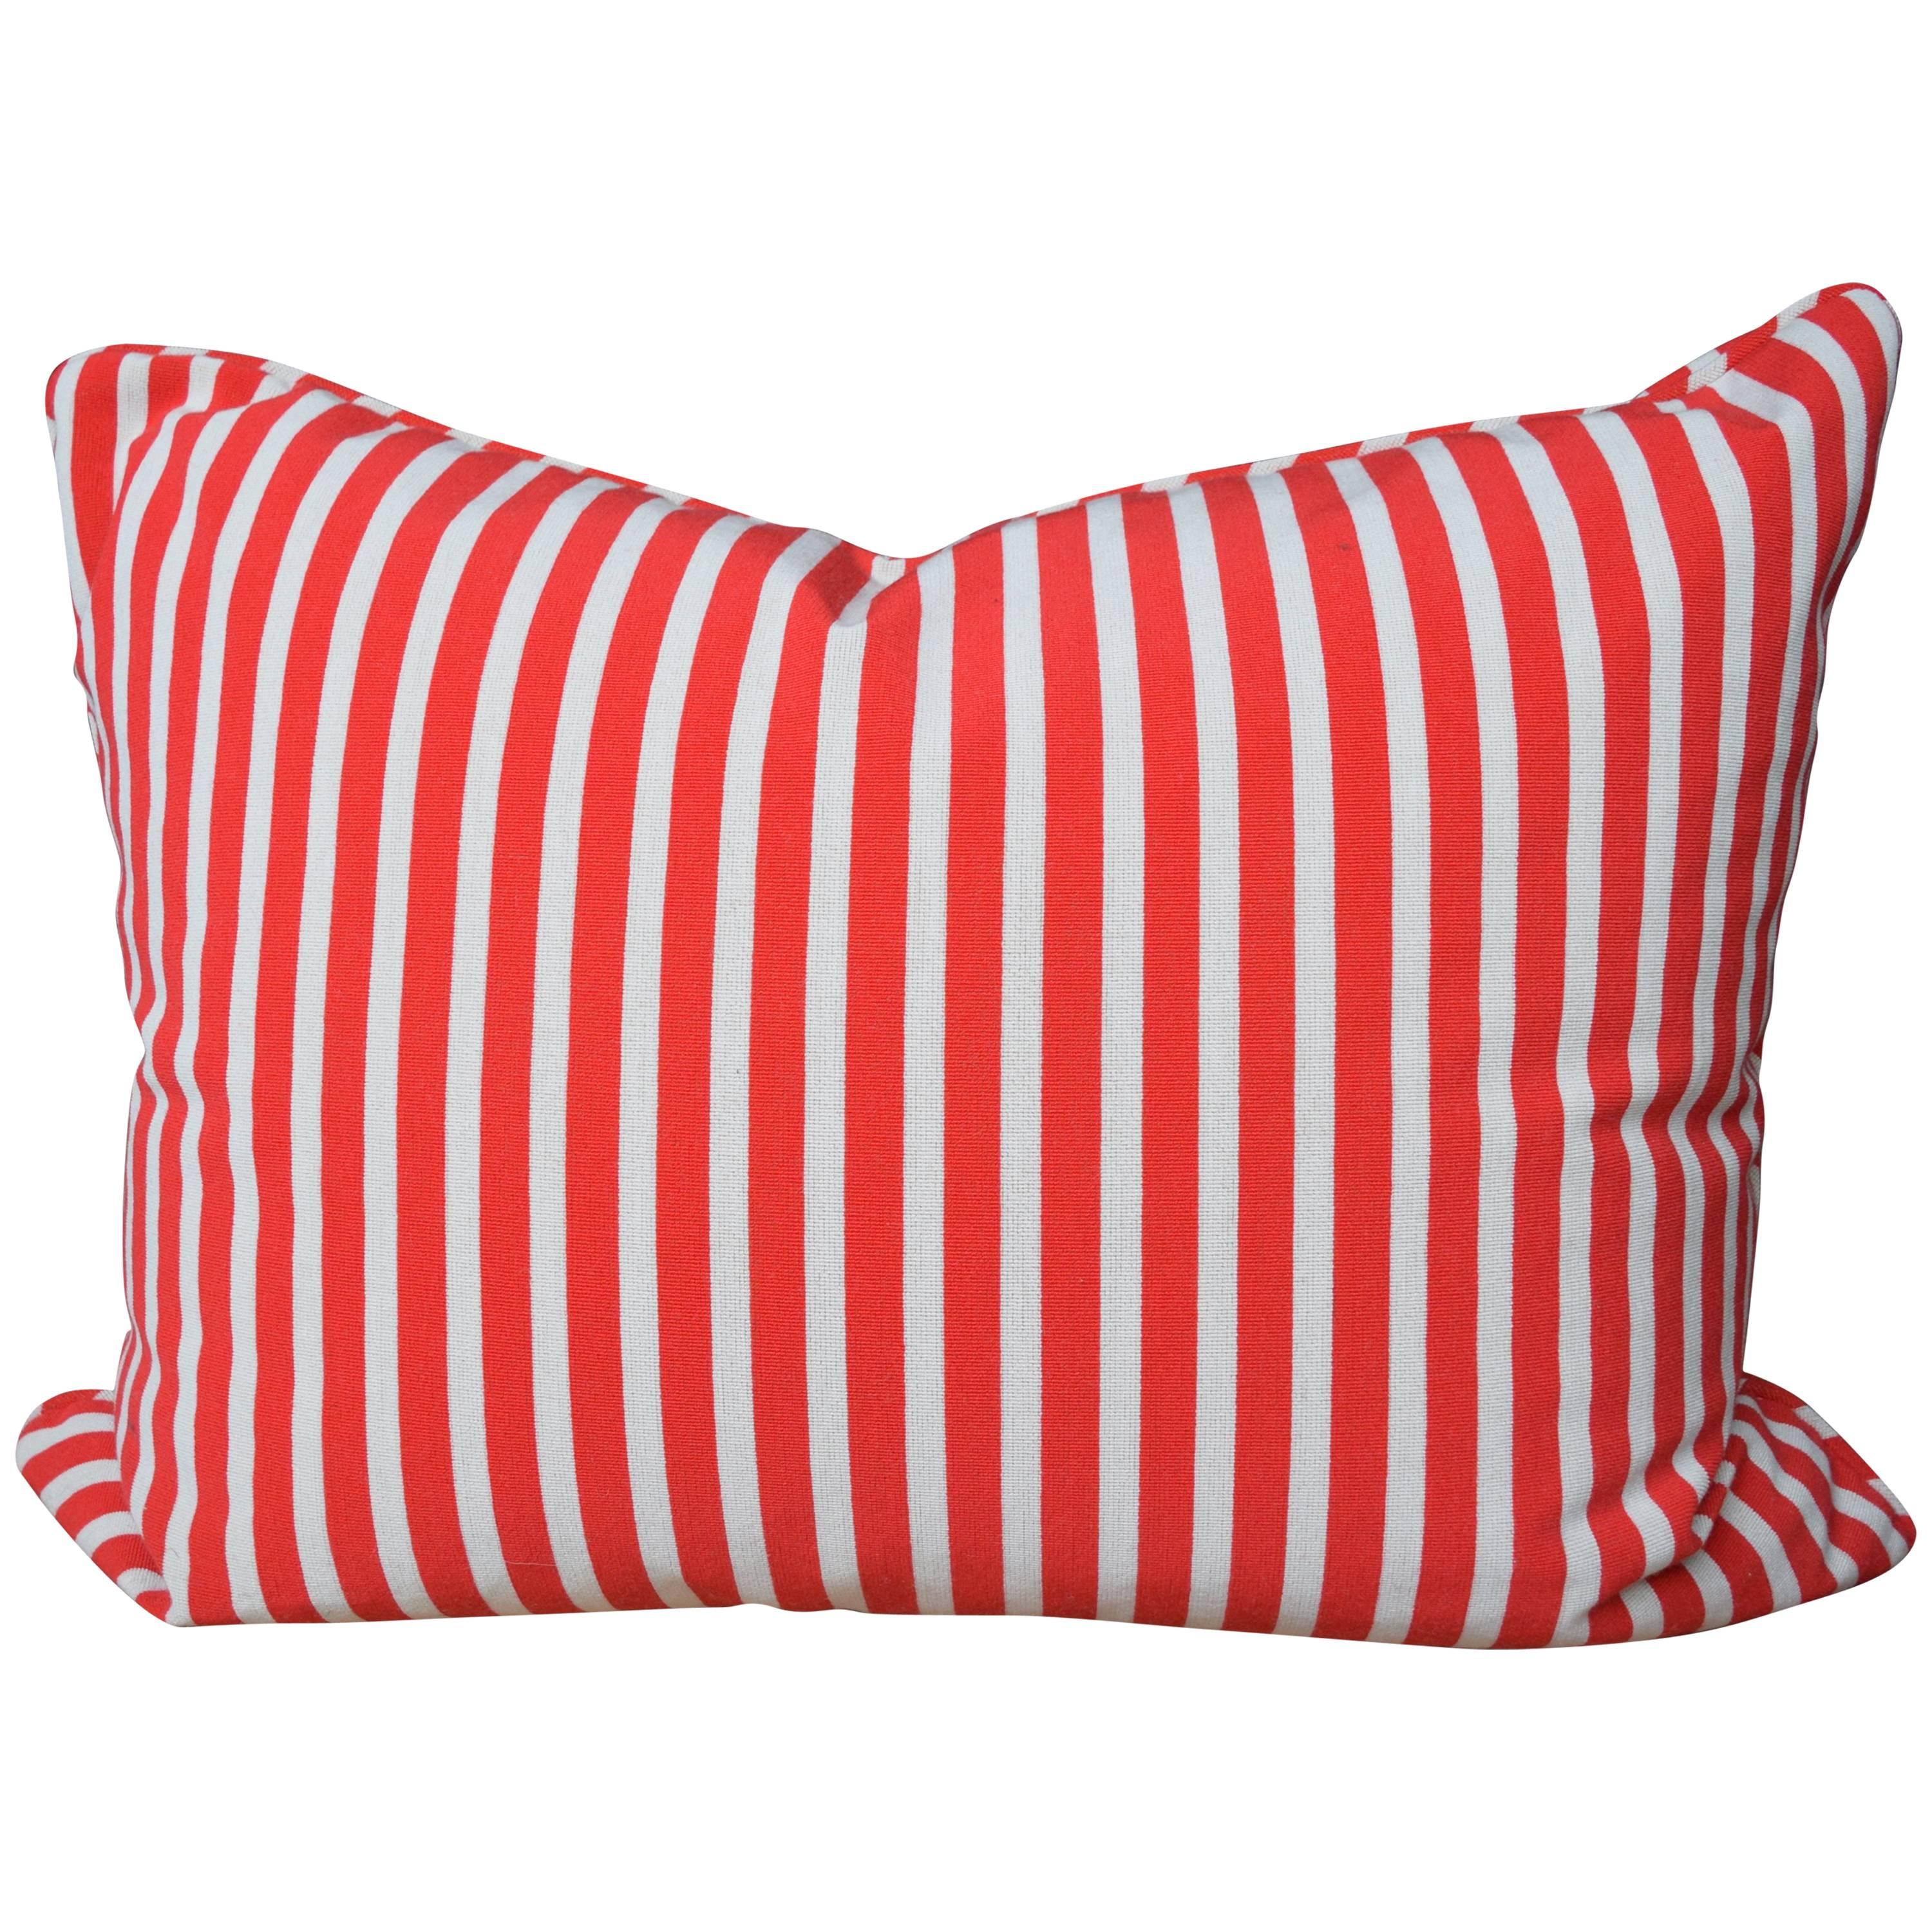 Large Cushion in Red and White Gert Voorjans for Jim Thompson Epinglé Fabric For Sale